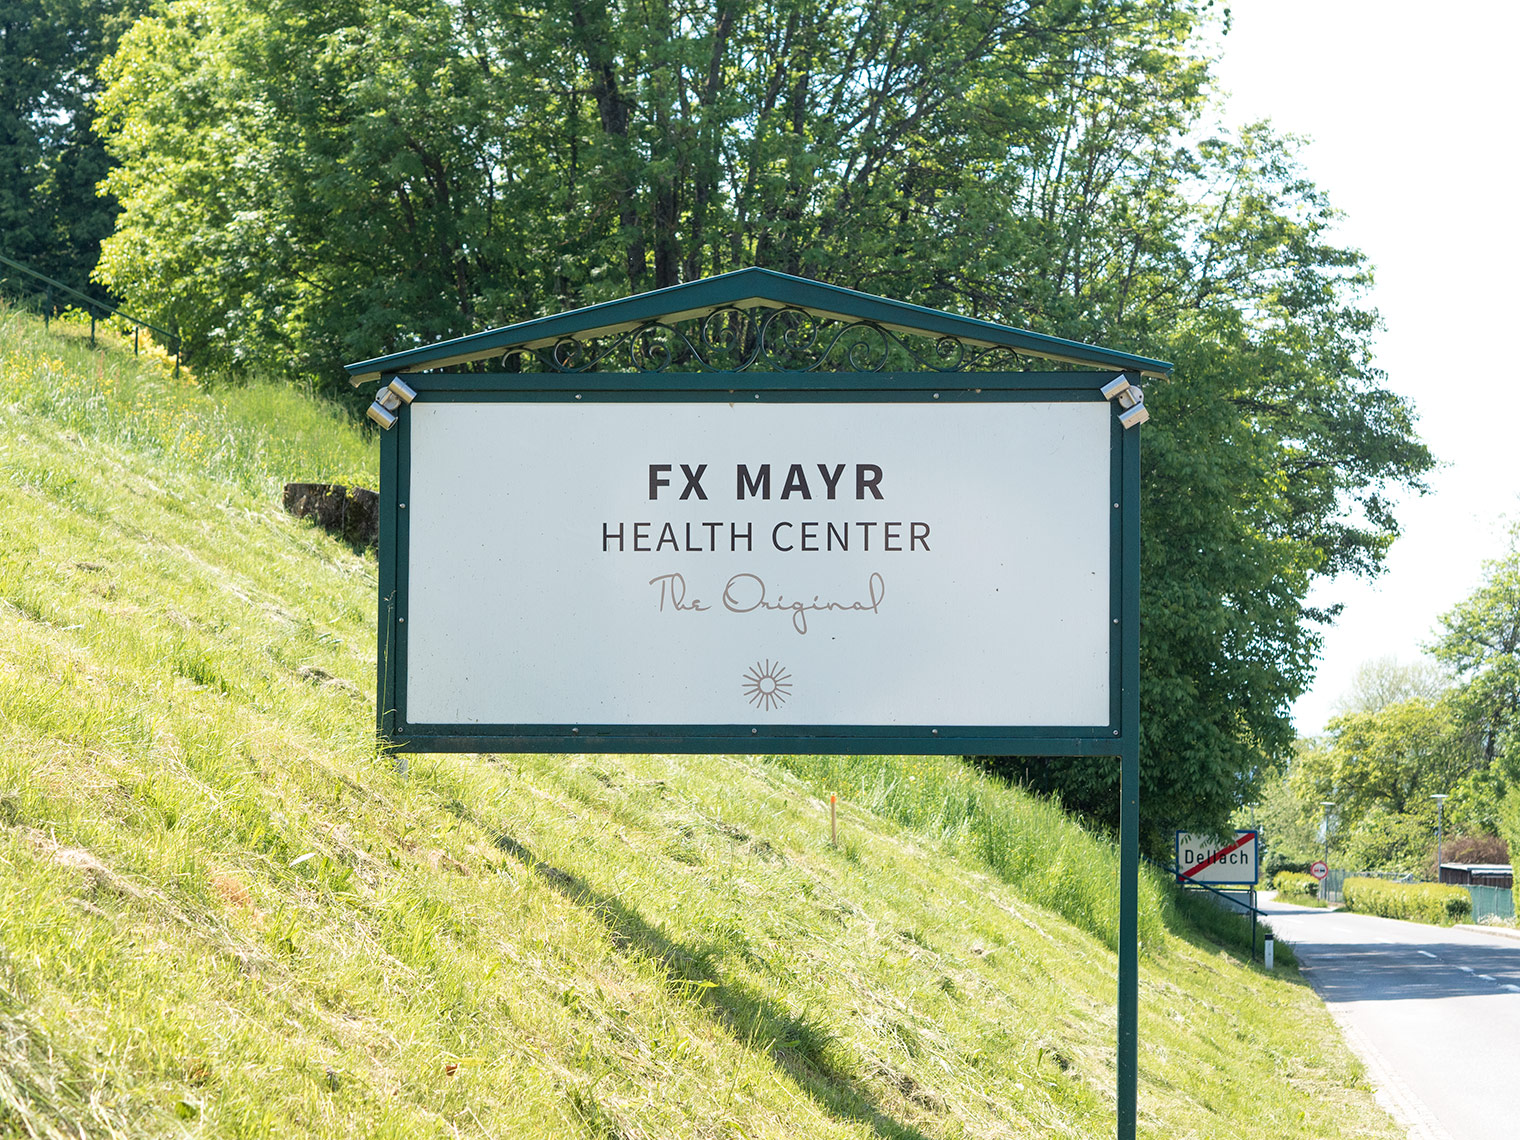 Day by day review of The Original FX Mayr clinic in Austria by Chic Journal